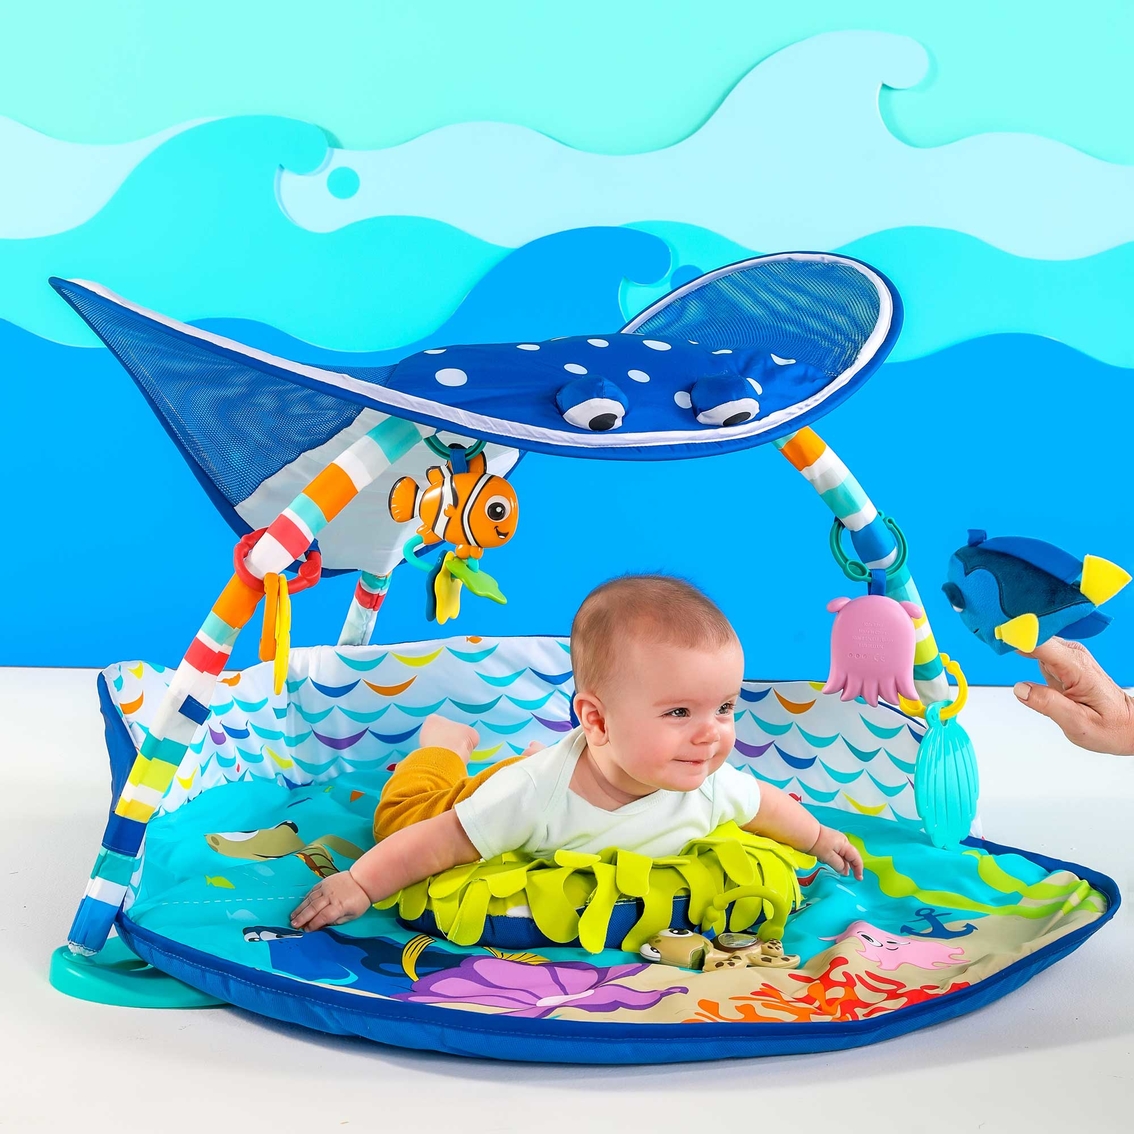 Shop Disney Toys Finding | | | Play Nemo The & Exchange & Baby Mr. Gyms Ray\'s Ocean Lights Mats Baby Gym